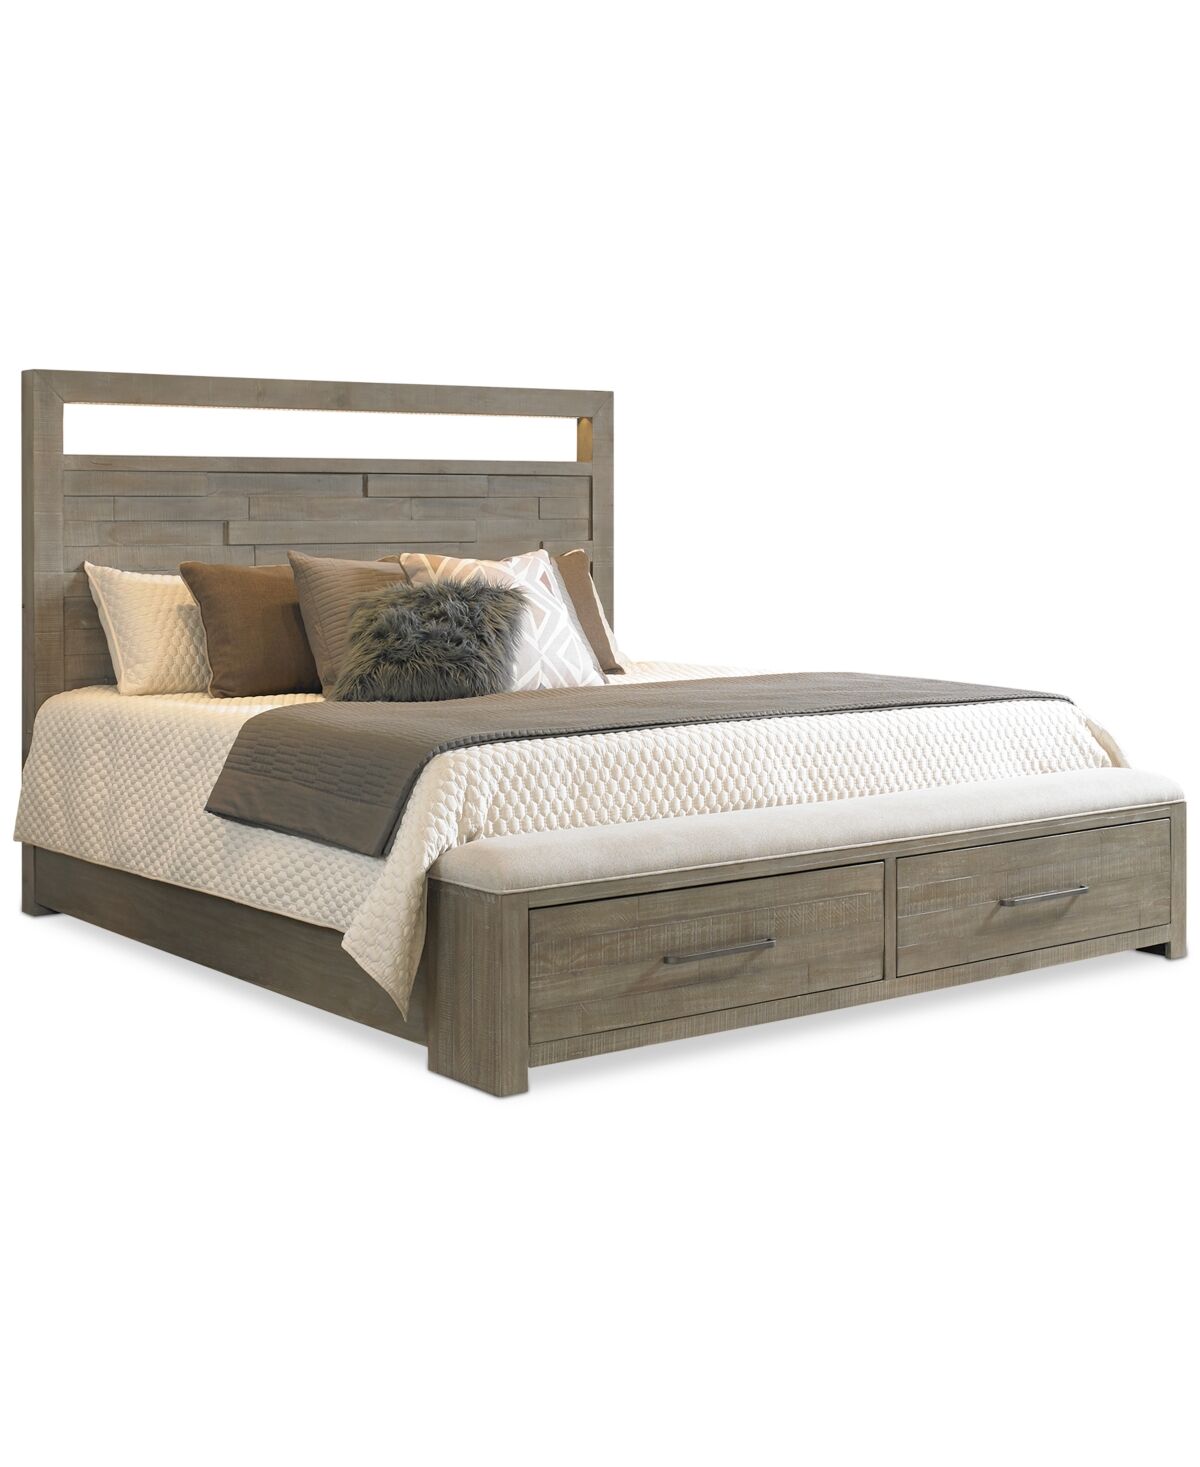 Furniture Intrigue Queen Bed With Footboard Storage Bench